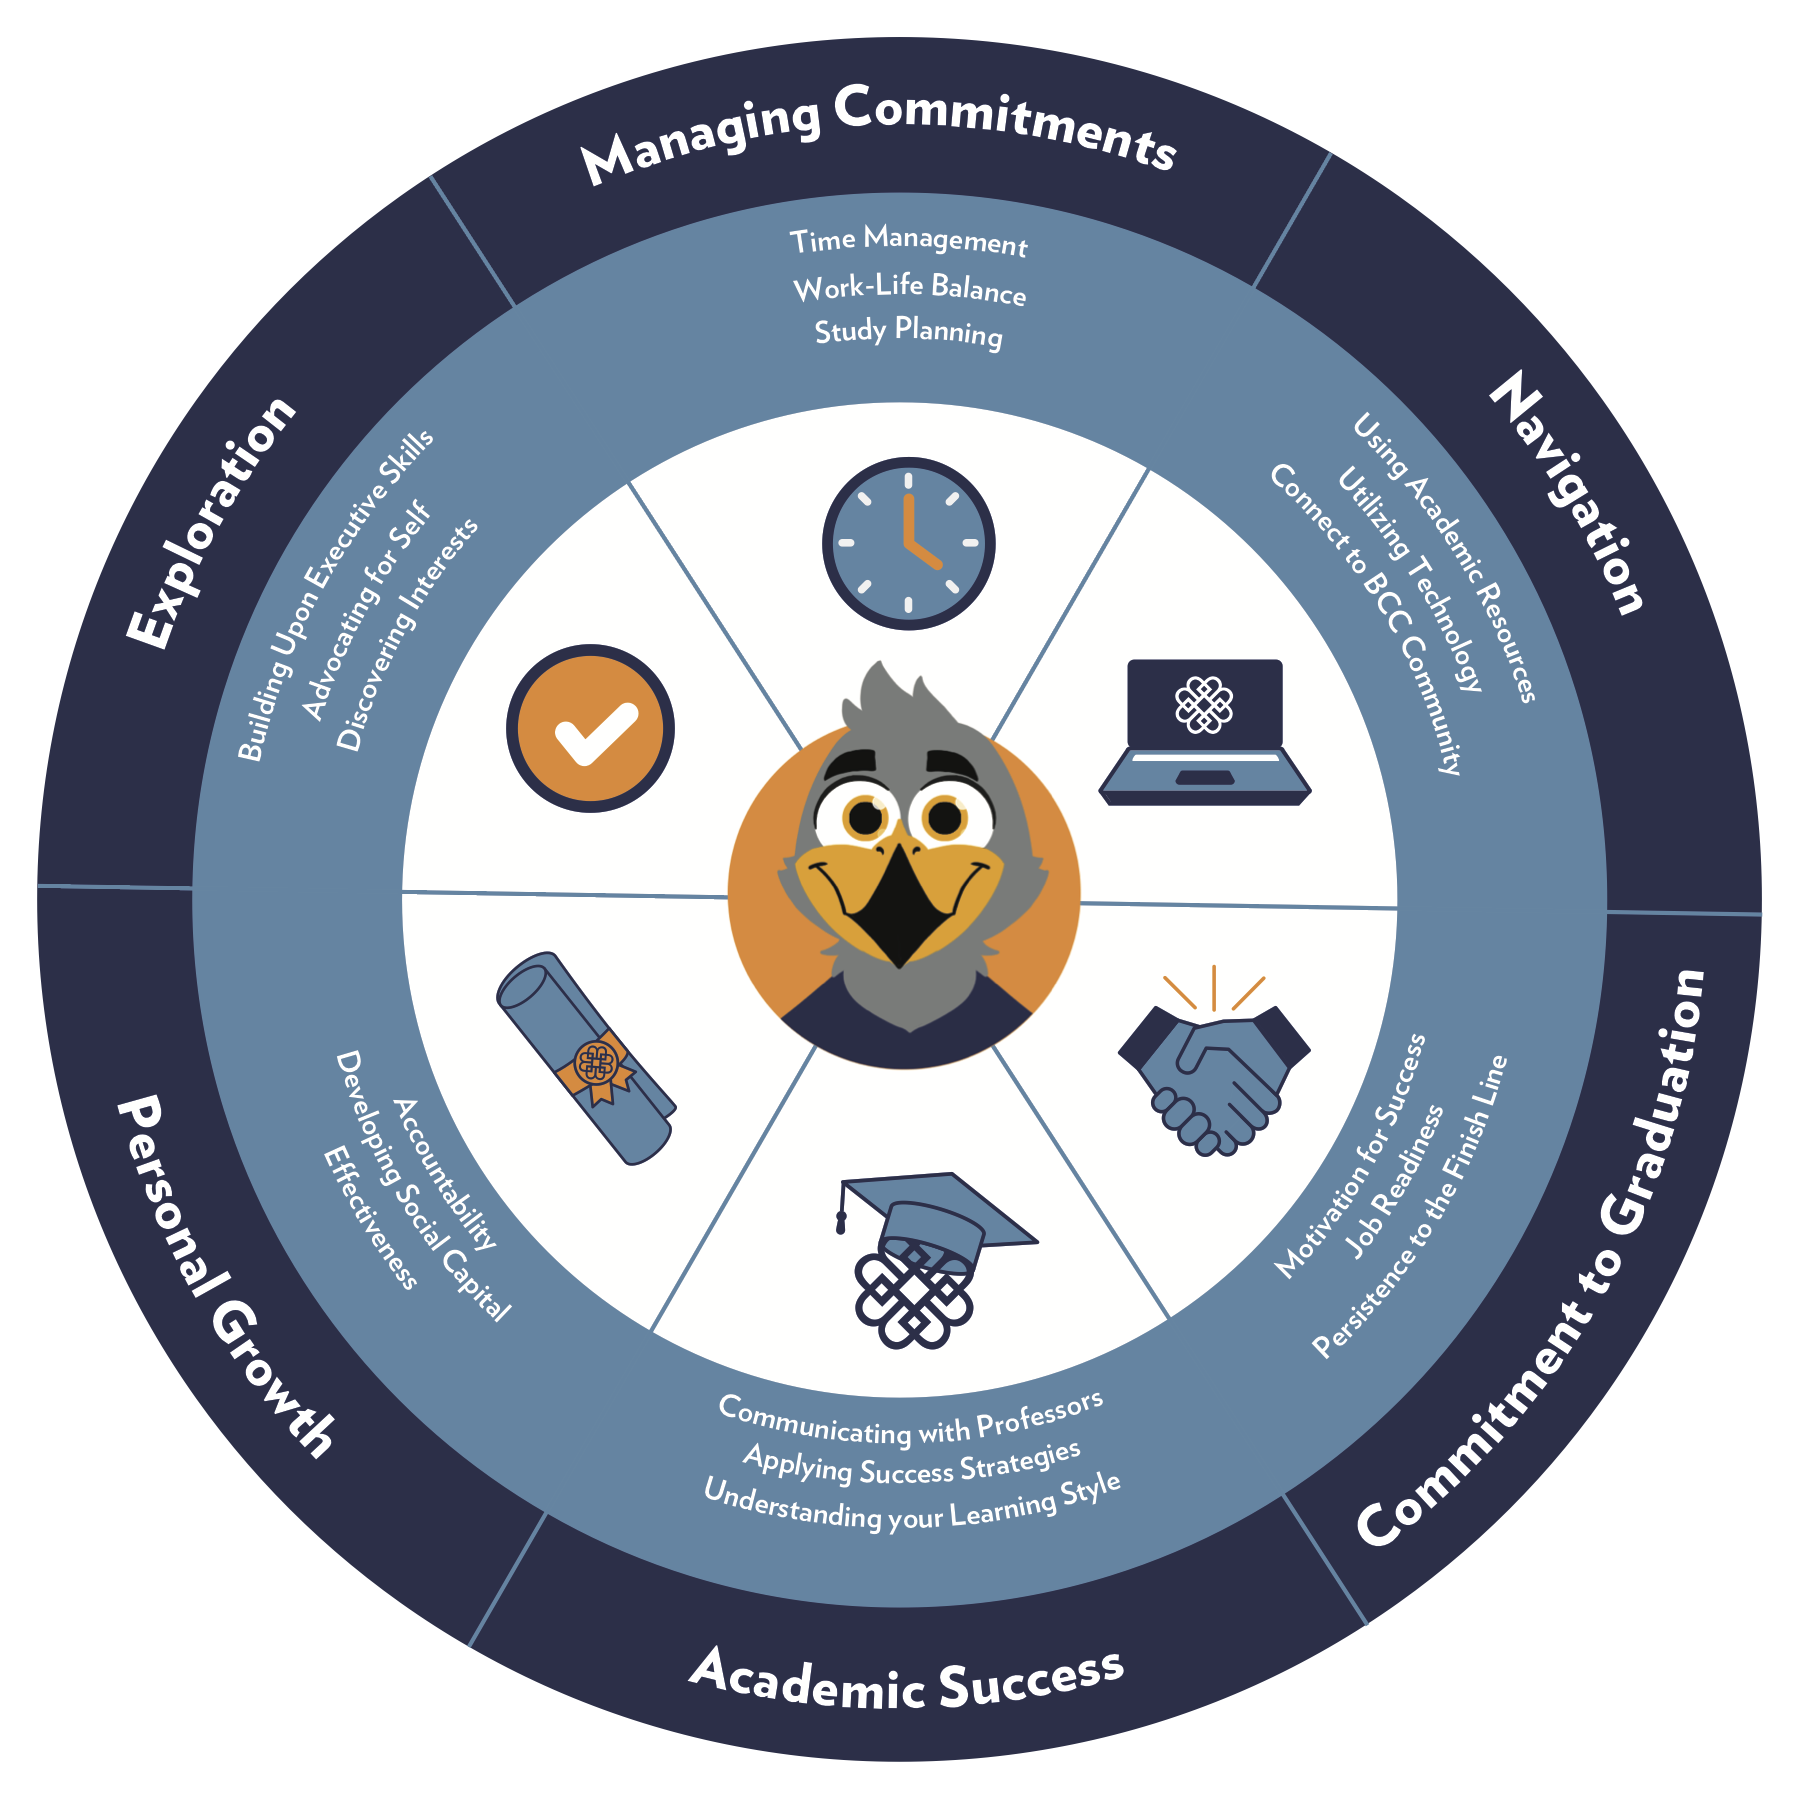 A visual graphic depicting how the various components of academic success coaching work together to help students meet their requirements and achieve their goals